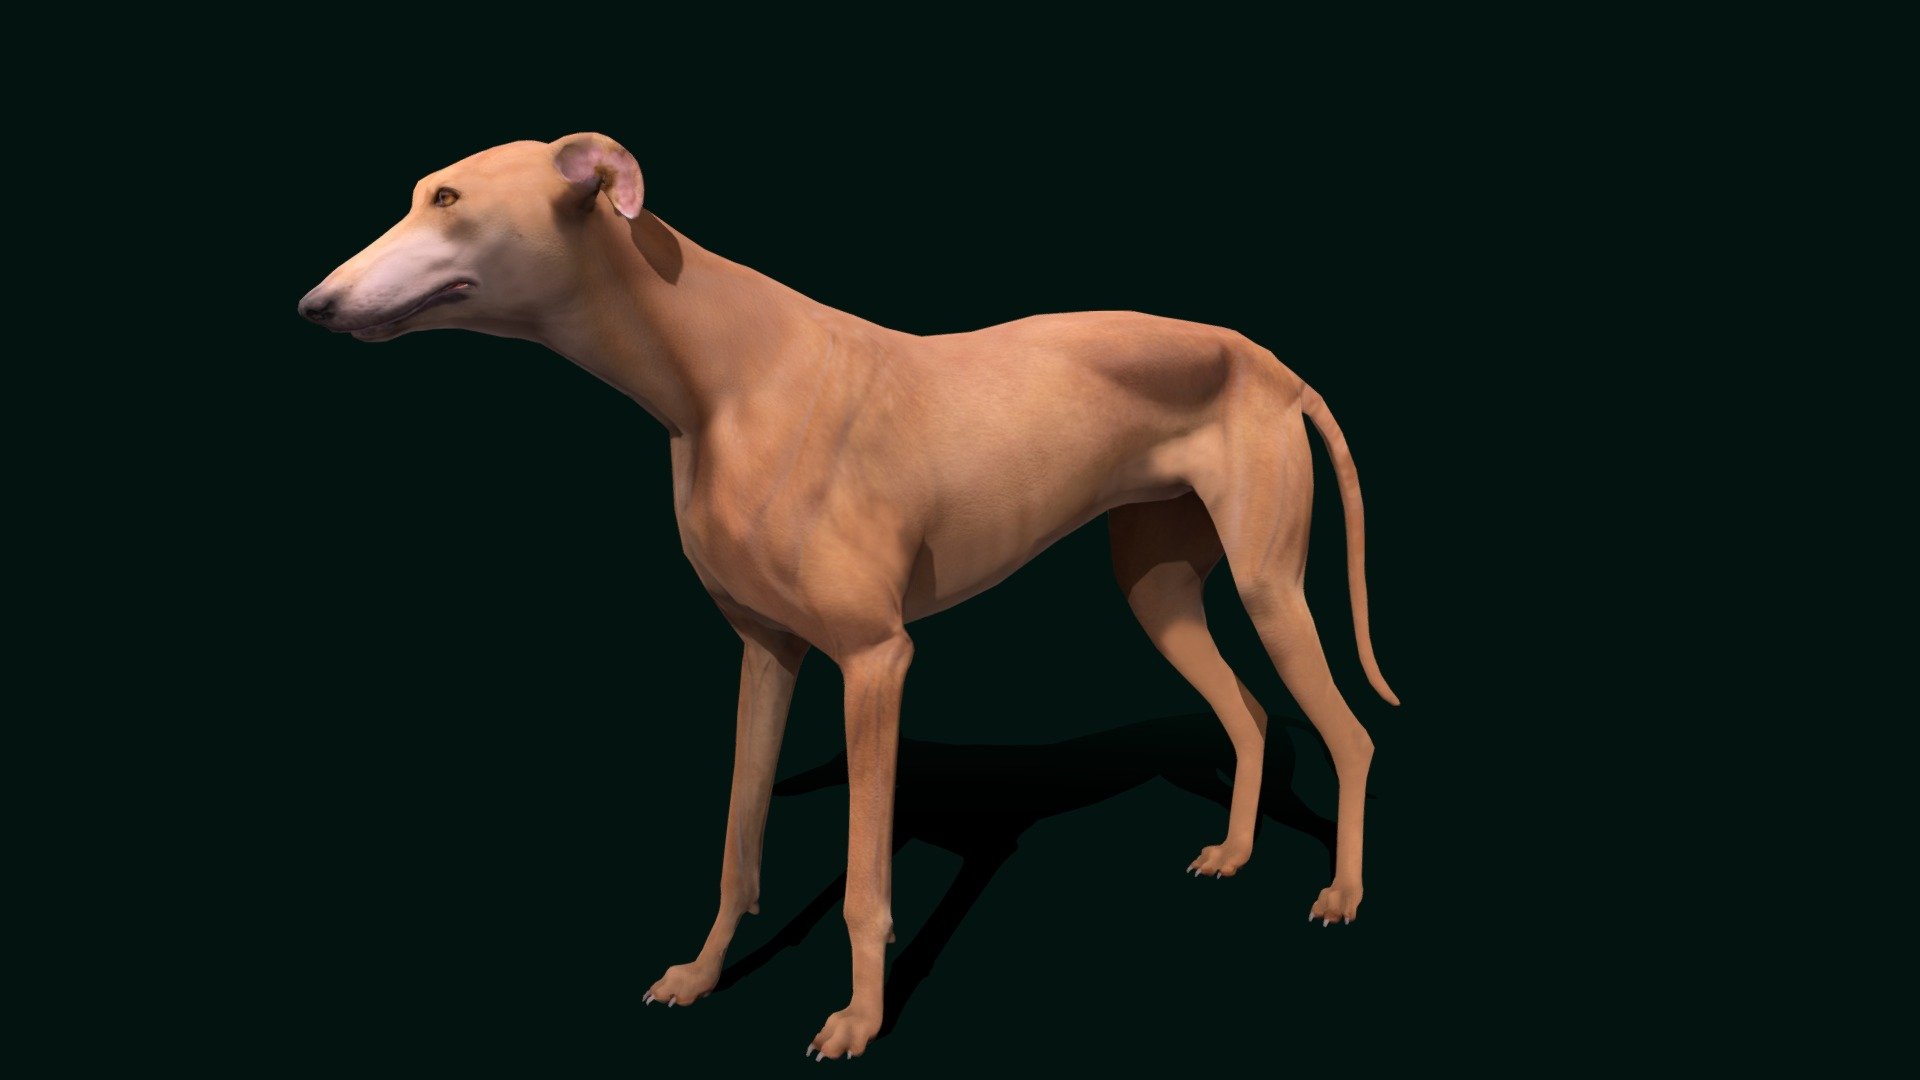 English Greyhound Dog(fastest dog breed)sighthound  

Canis lupus familiaris Animal Mammal( Racing,Hunting) Pet,Cute,S-shaped

1 Draw Calls

Lowpoly (Multires)

Game Ready 

Subdivision Surface Ready

12- Animations (Root/In_Place)UnrealBone

4K PBR Textures Material

Unreal FBX (Unreal 4,5 Plus)

Unity FBX

Blend File 3.6.5 LTS

USDZ File (AR Ready). Real Scale Dimension (Xcode ,Reality Composer, Keynote Ready)

Textures Files

GLB File (Unreal 5.1 Plus Native Support)


Gltf File ( Spark AR, Lens Studio(SnapChat) , Effector(Tiktok) , Spline, Play Canvas,Omiverse ) Compatible




Triangles -15882



Faces -8745

Edges -16758

Vertices -8124

Diffuse, Metallic, Roughness , Normal Map ,Specular Map,AO
 The English Greyhound, or simply the Greyhound, is a breed of dog, a sighthound which has been bred for coursing, greyhound racing and hunting. Since the rise in large-scale adoption of retired racing Greyhounds, the breed has seen a resurgence in popularity as a family pet 3d model